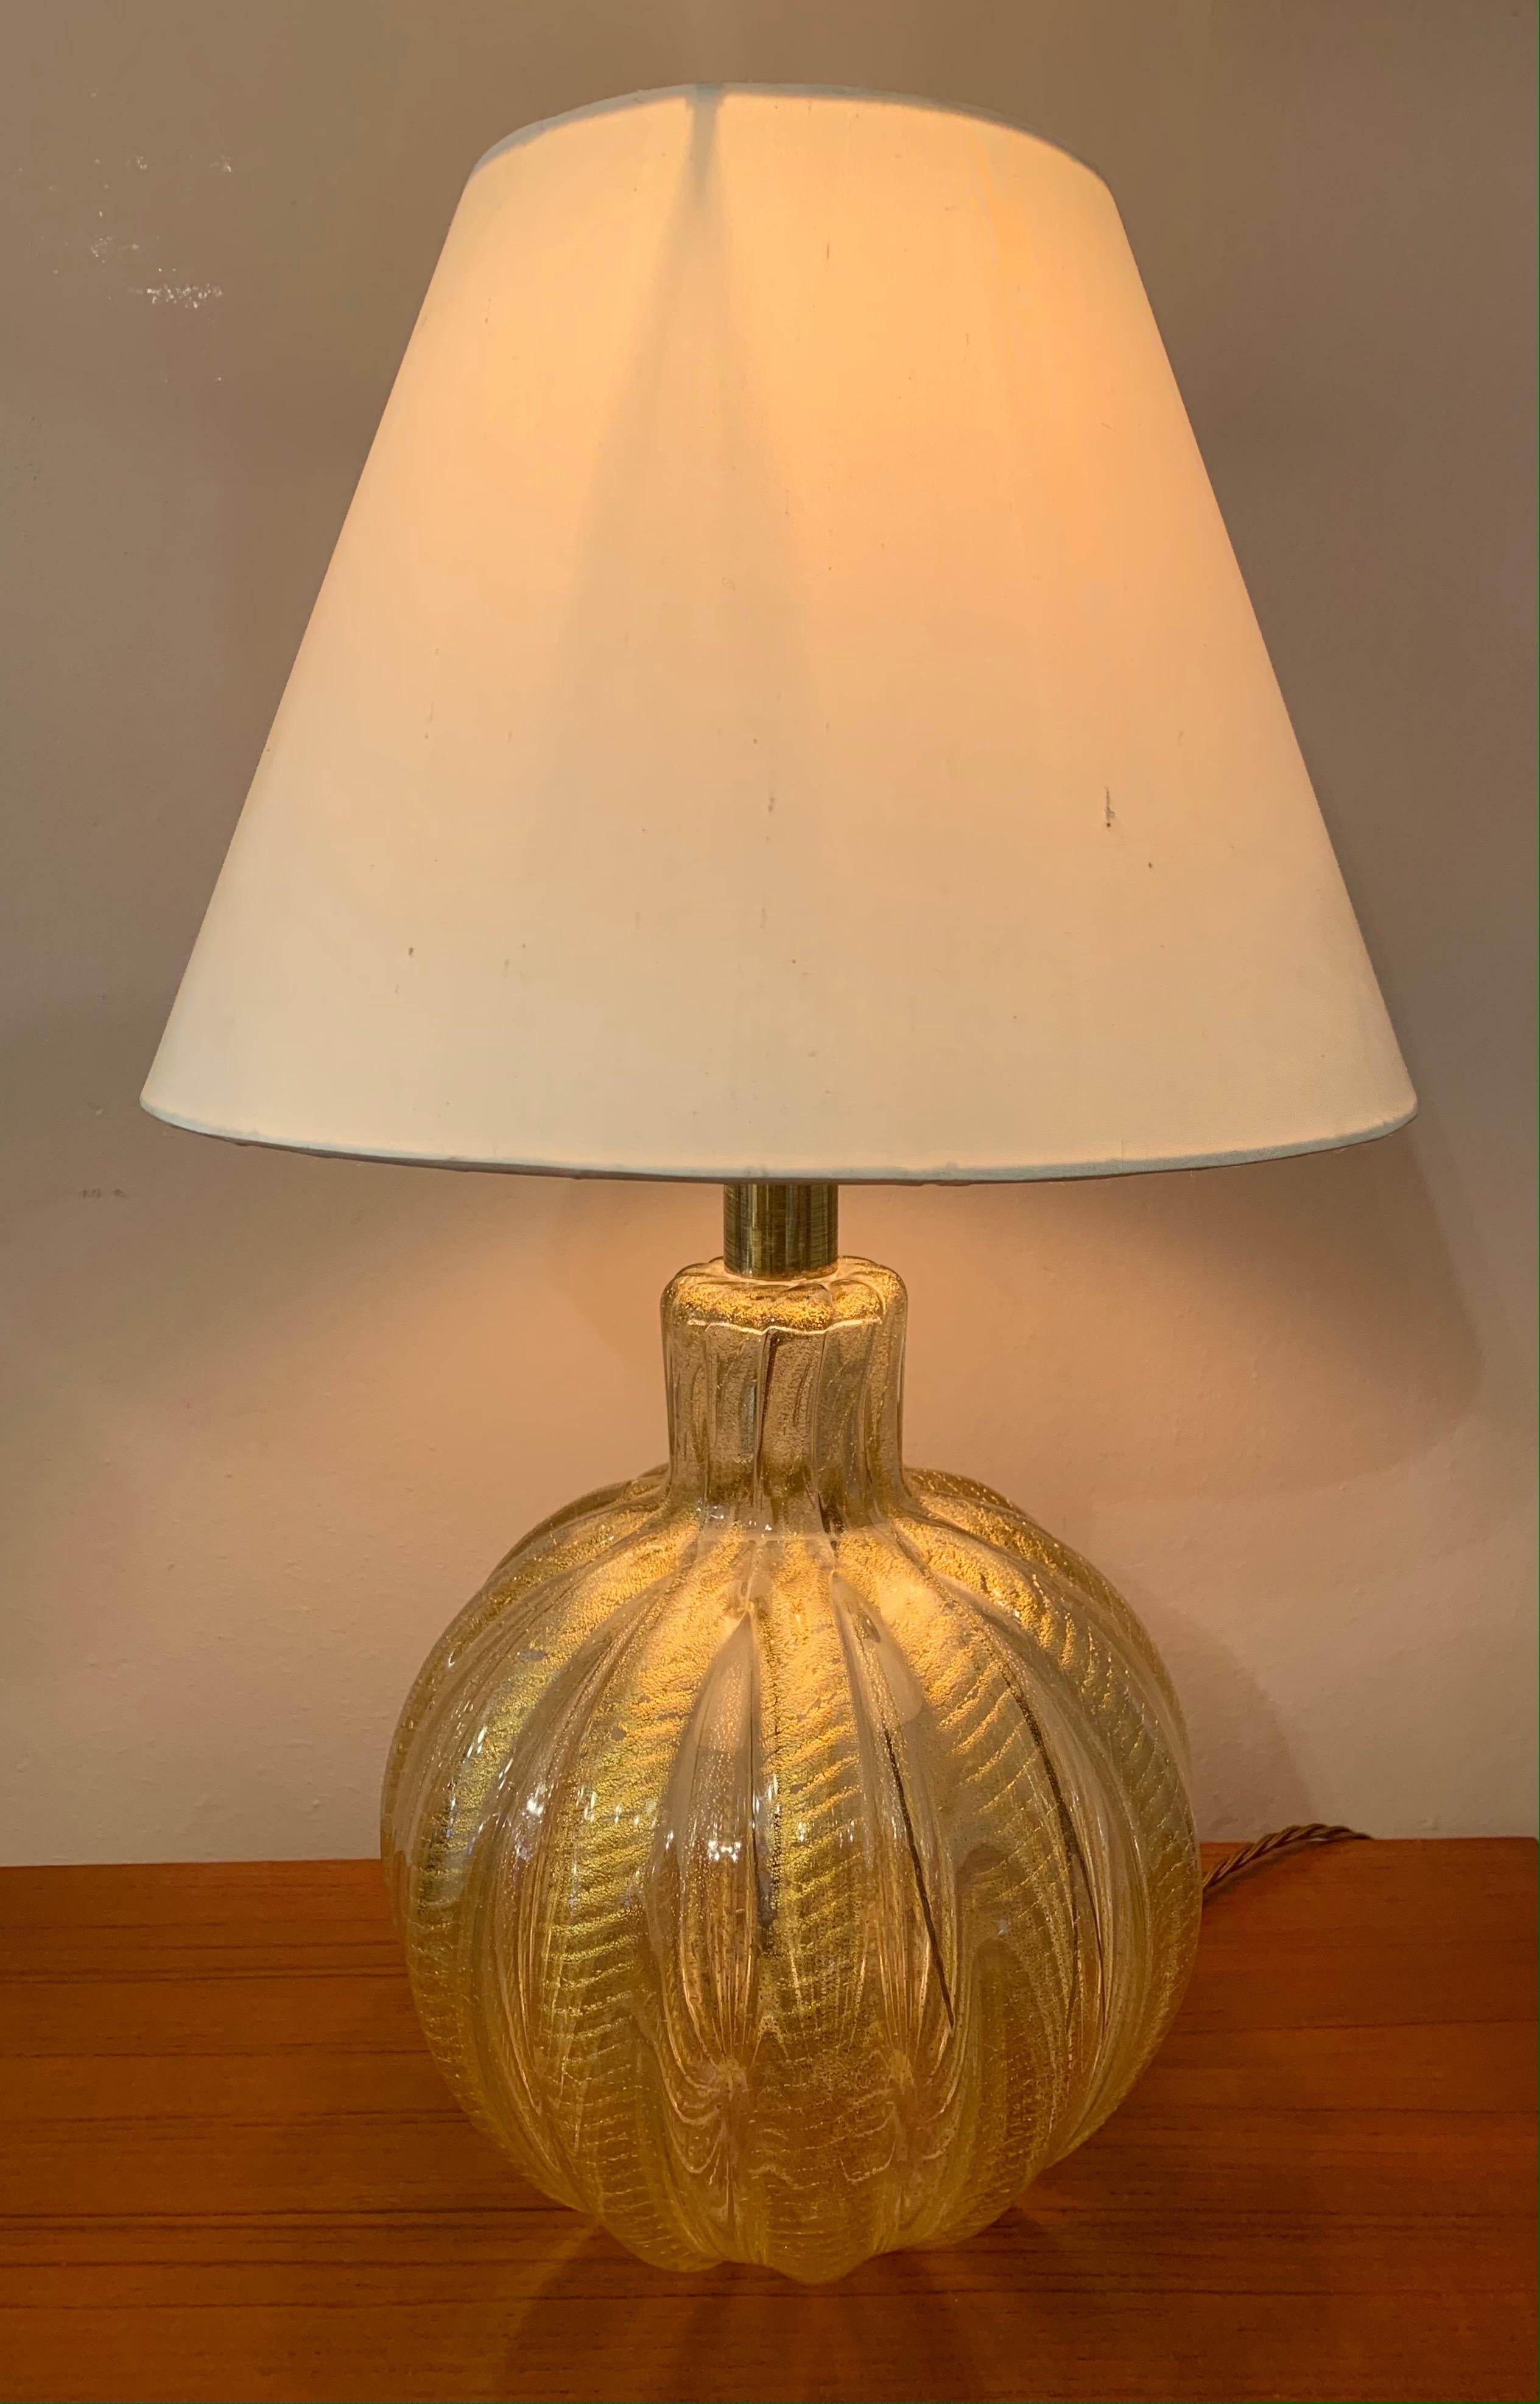 A 1950s, Murano, Barovier & Toso globe table lamp with gold leaf infused glass. Handcrafted in Murano, Italy, during the 1950s and 1960s. The lamp is hand blown with a ribbed thick-walled glass body with gold inclusions within it. A new brass